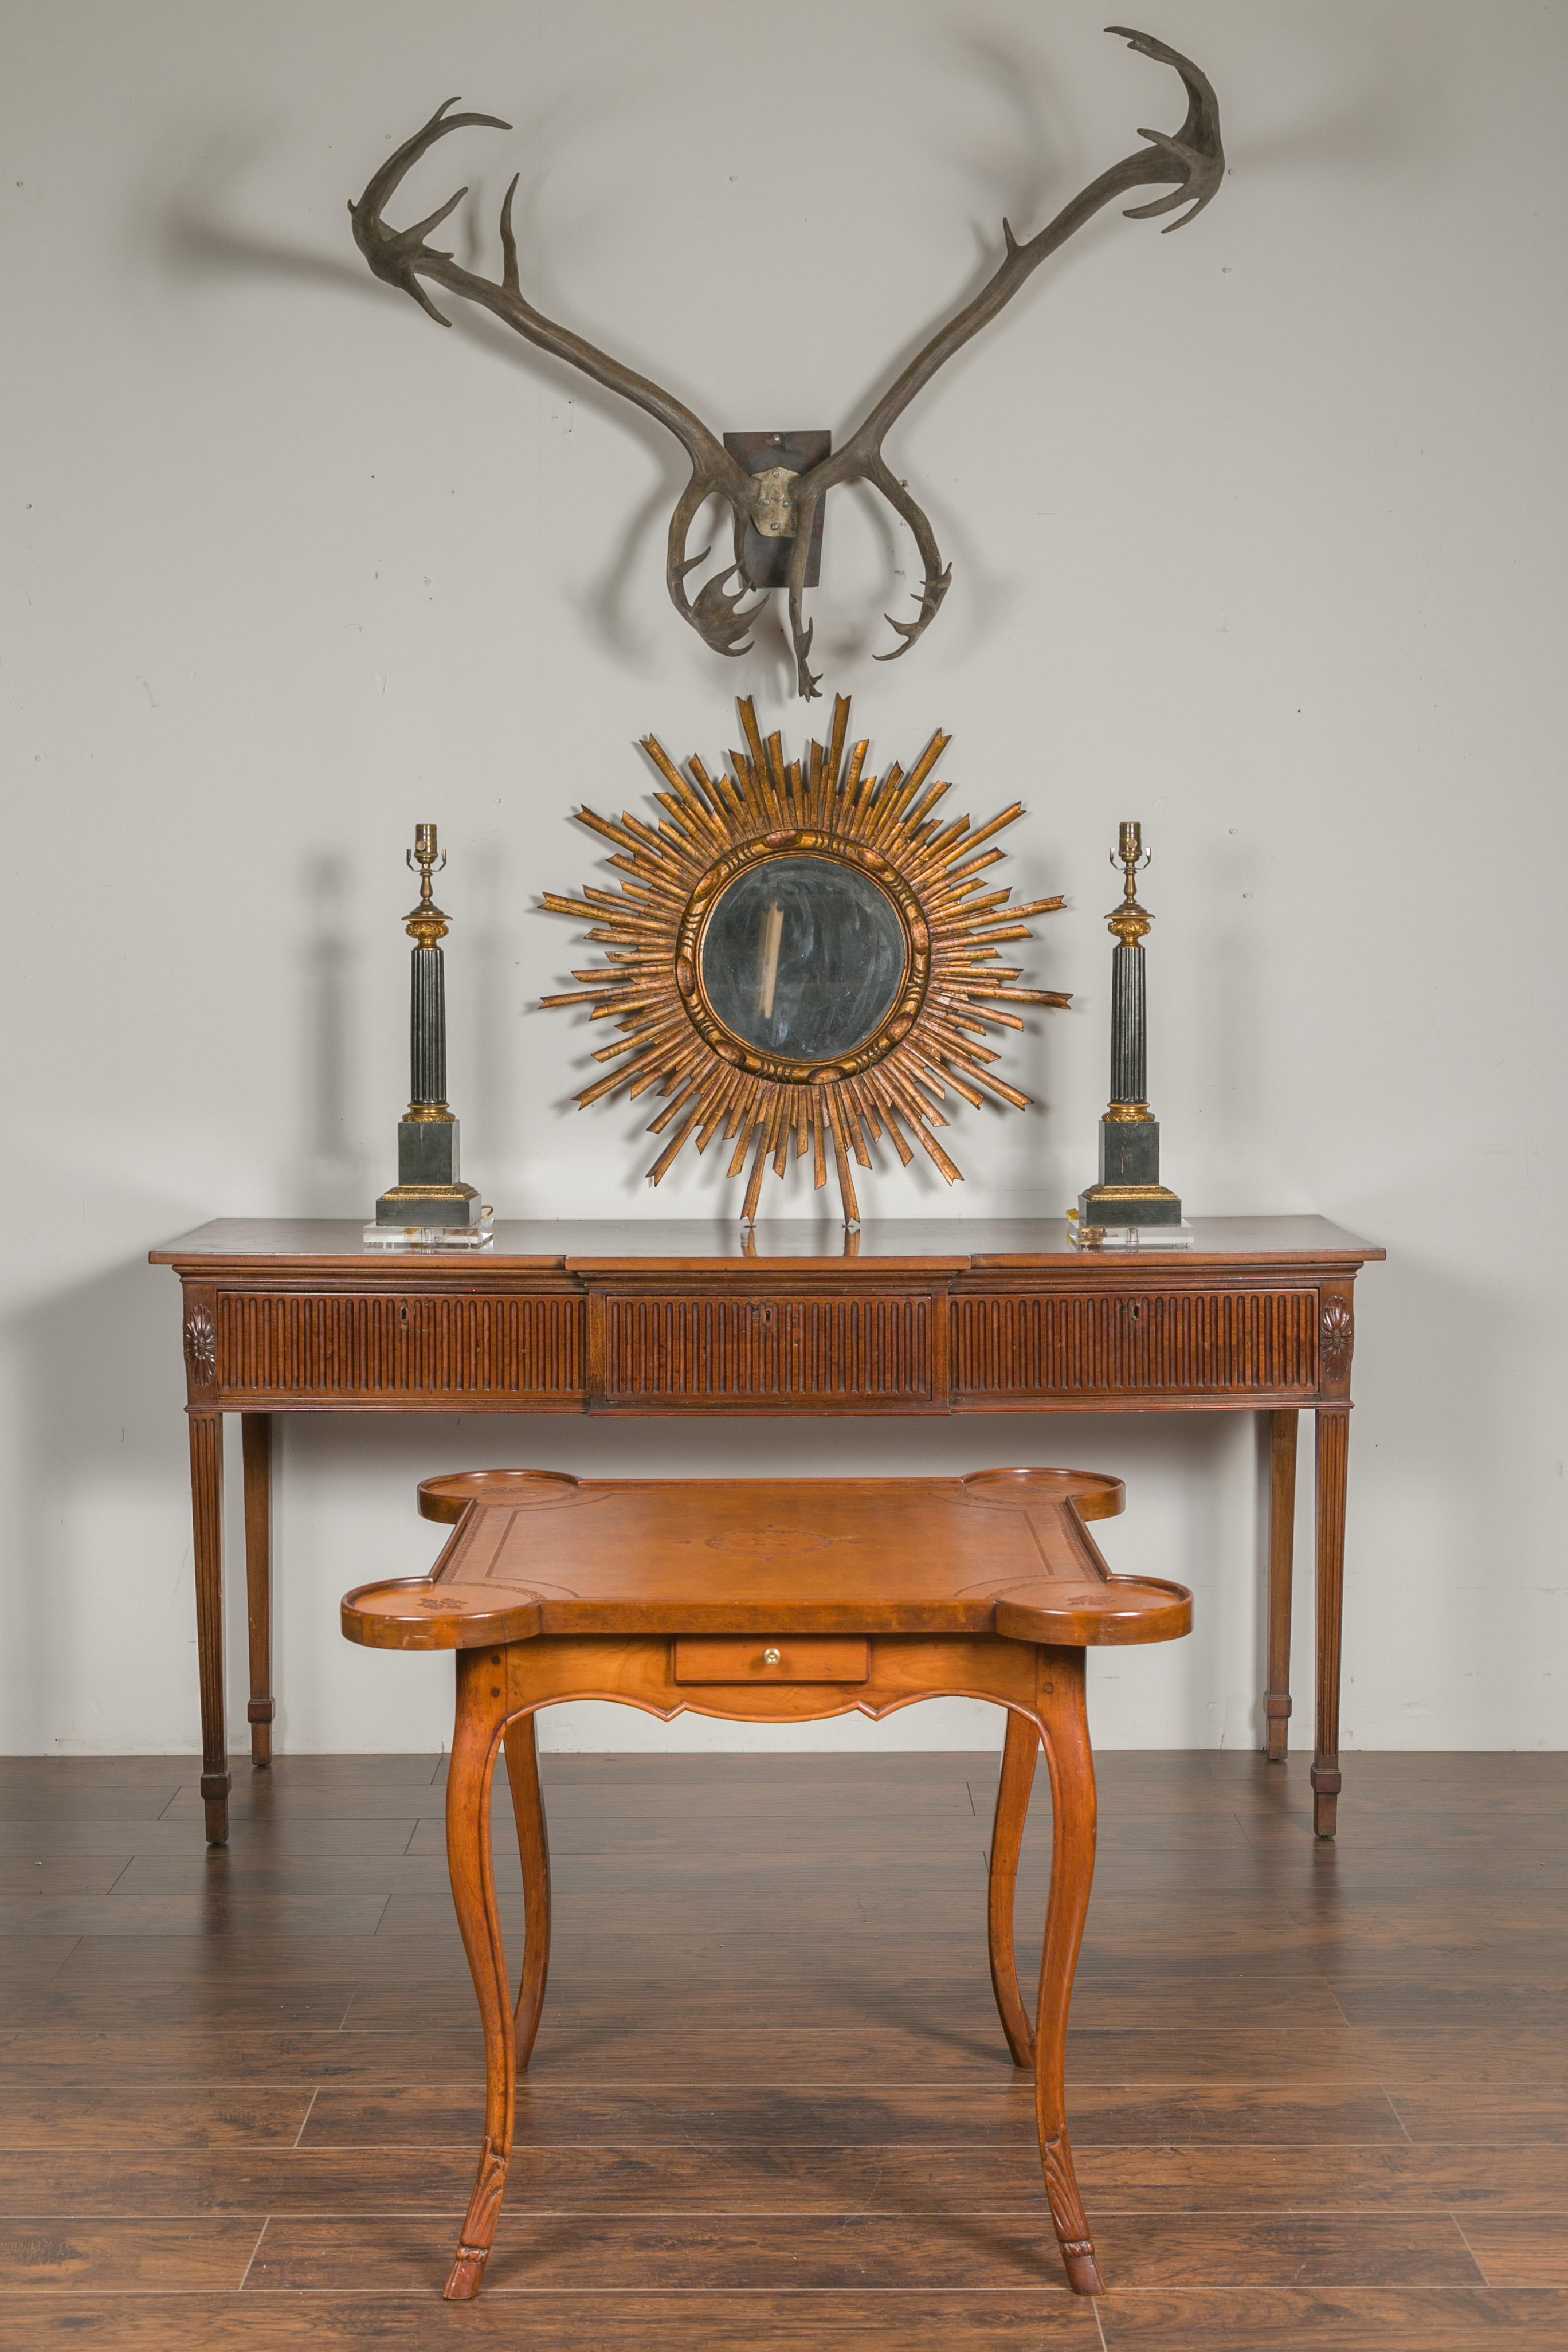 A French Napoleon III period walnut game table from the mid-19th century, with leather top and four drawers. Created in France during the reign of Emperor Napoleon III, this walnut game table features a tooled leather top with rounded corners,